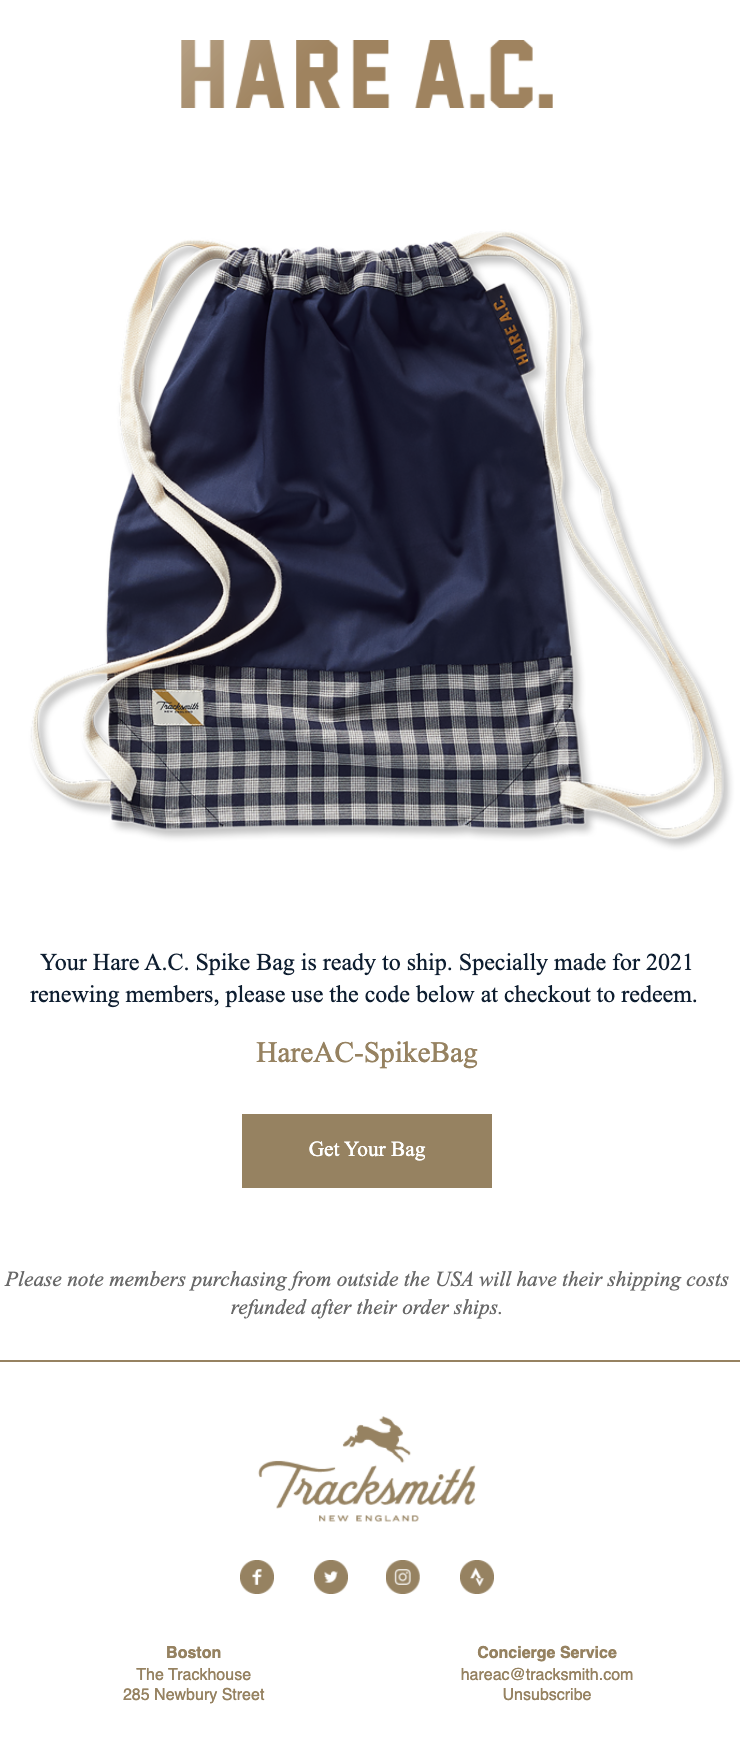 Tracksmith's email marketing campaign rewards customer loyalty and features a professionally photographed image of the spike bag in the email, so subscribers will see the quality of the bag before they place their order. The CTA is clear and direct, announcing a code for redemption along with a “Get Your Bag” button.